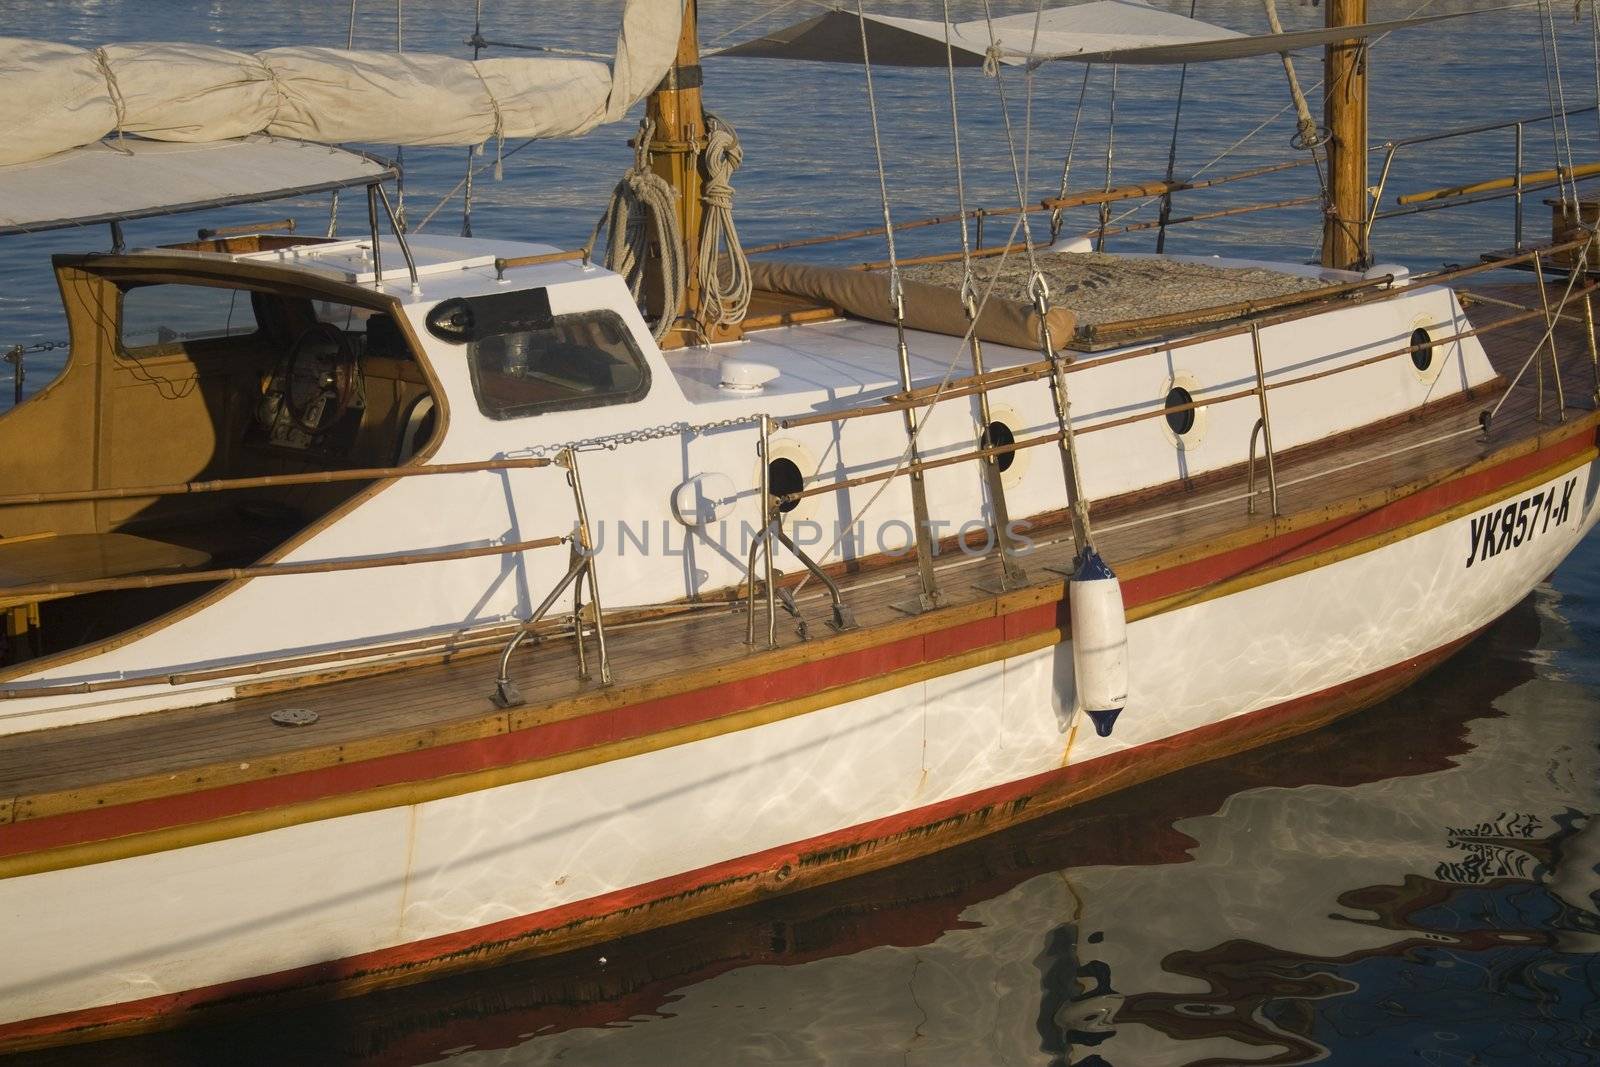 Close-up of a wooden sailboat docked in a harbor